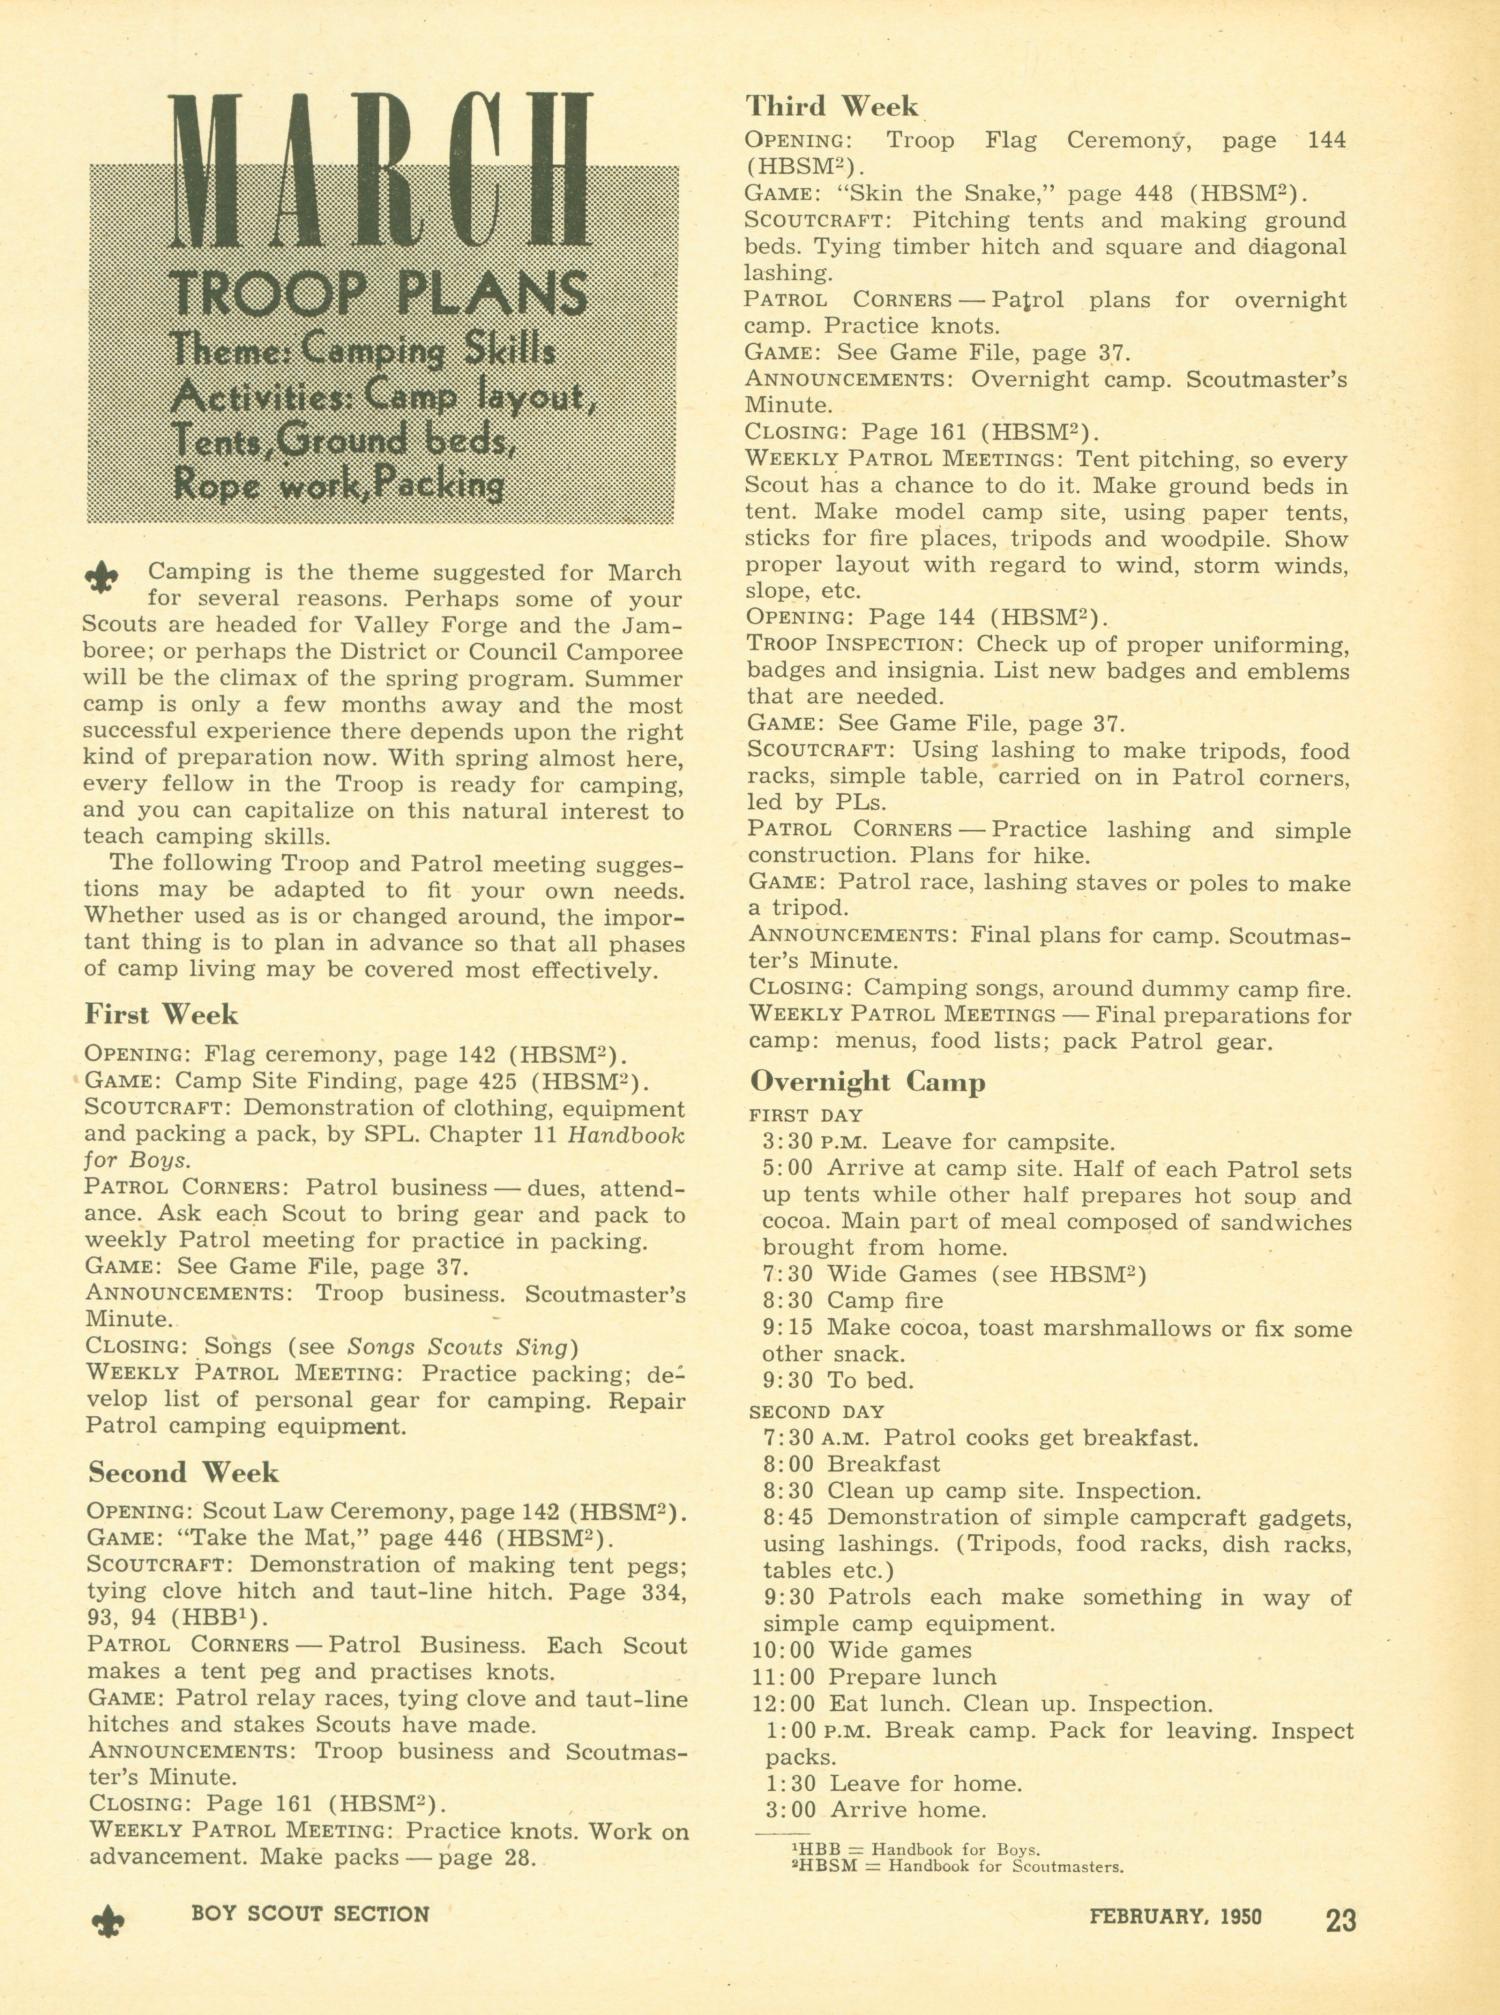 Scouting, Volume 38, Number 2, February 1950
                                                
                                                    23
                                                